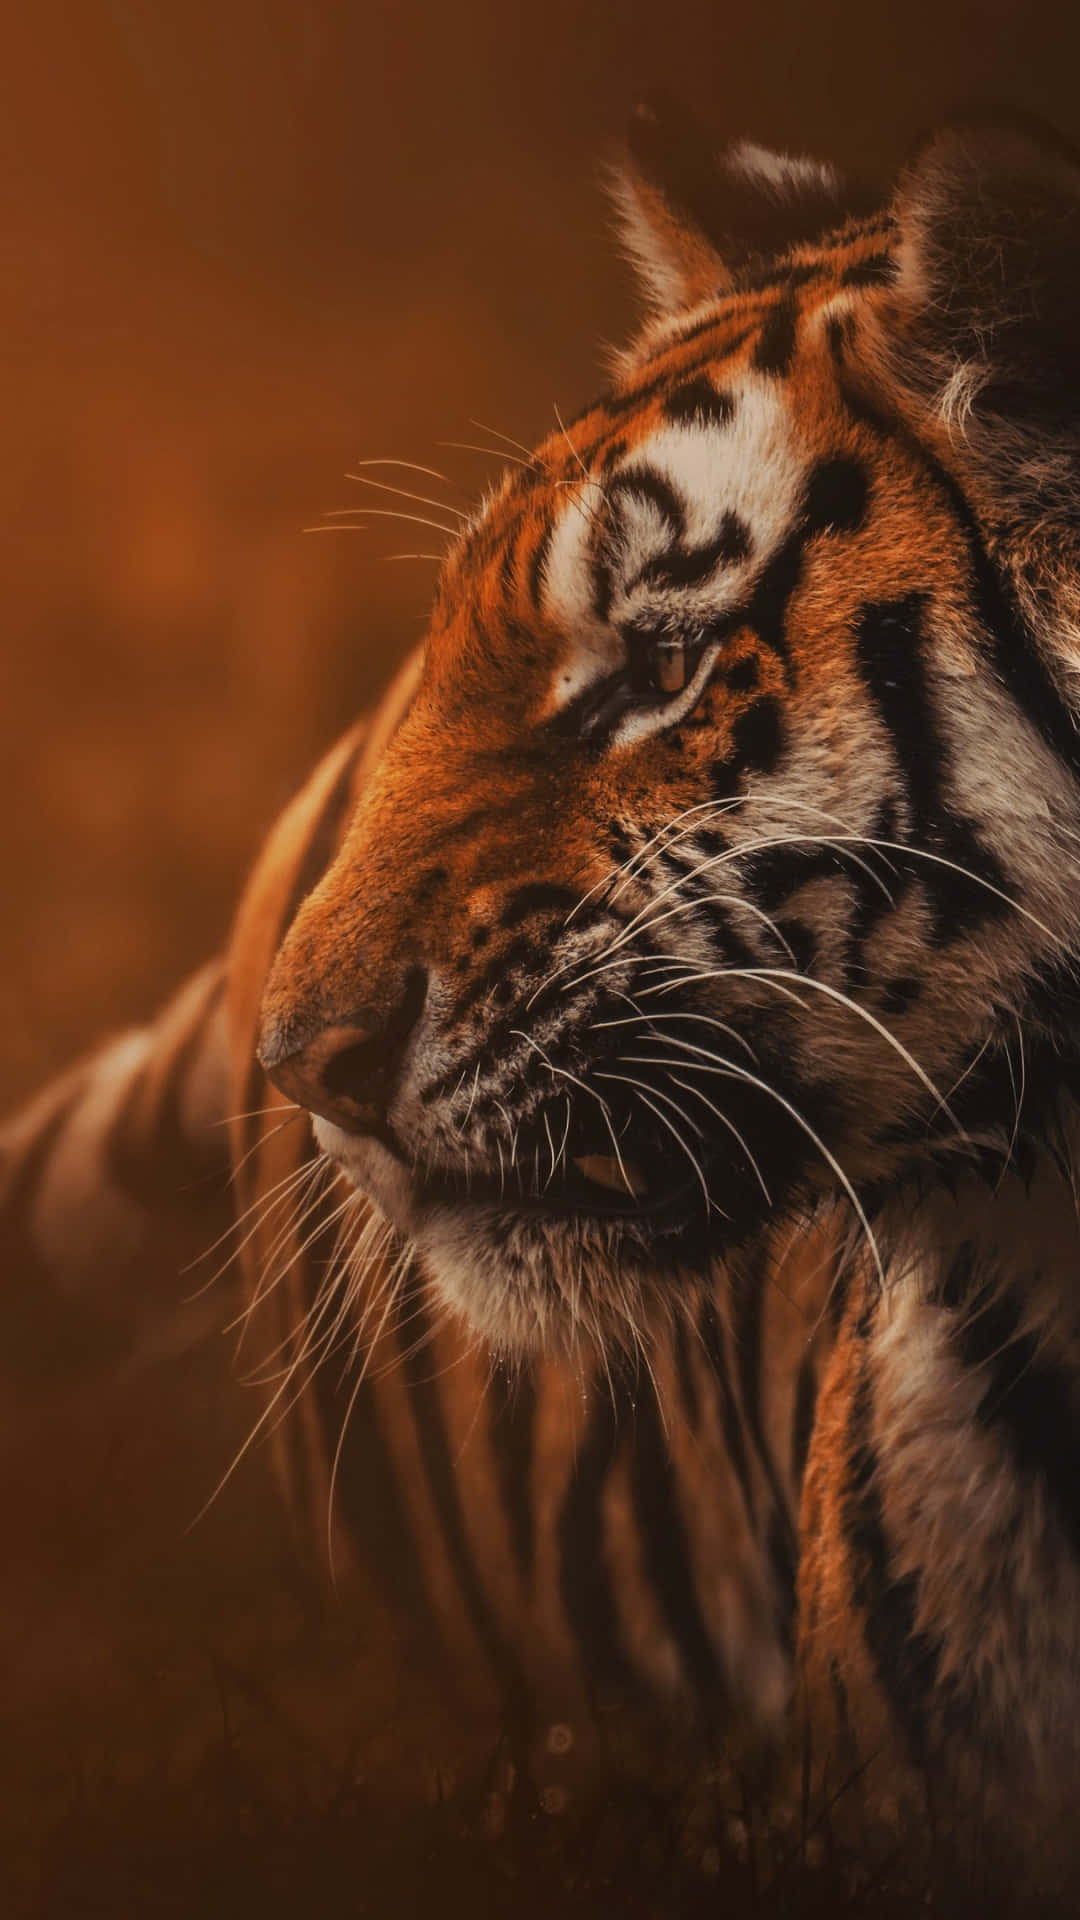 Get the modern cutting edge technology with the Tiger Phone Wallpaper